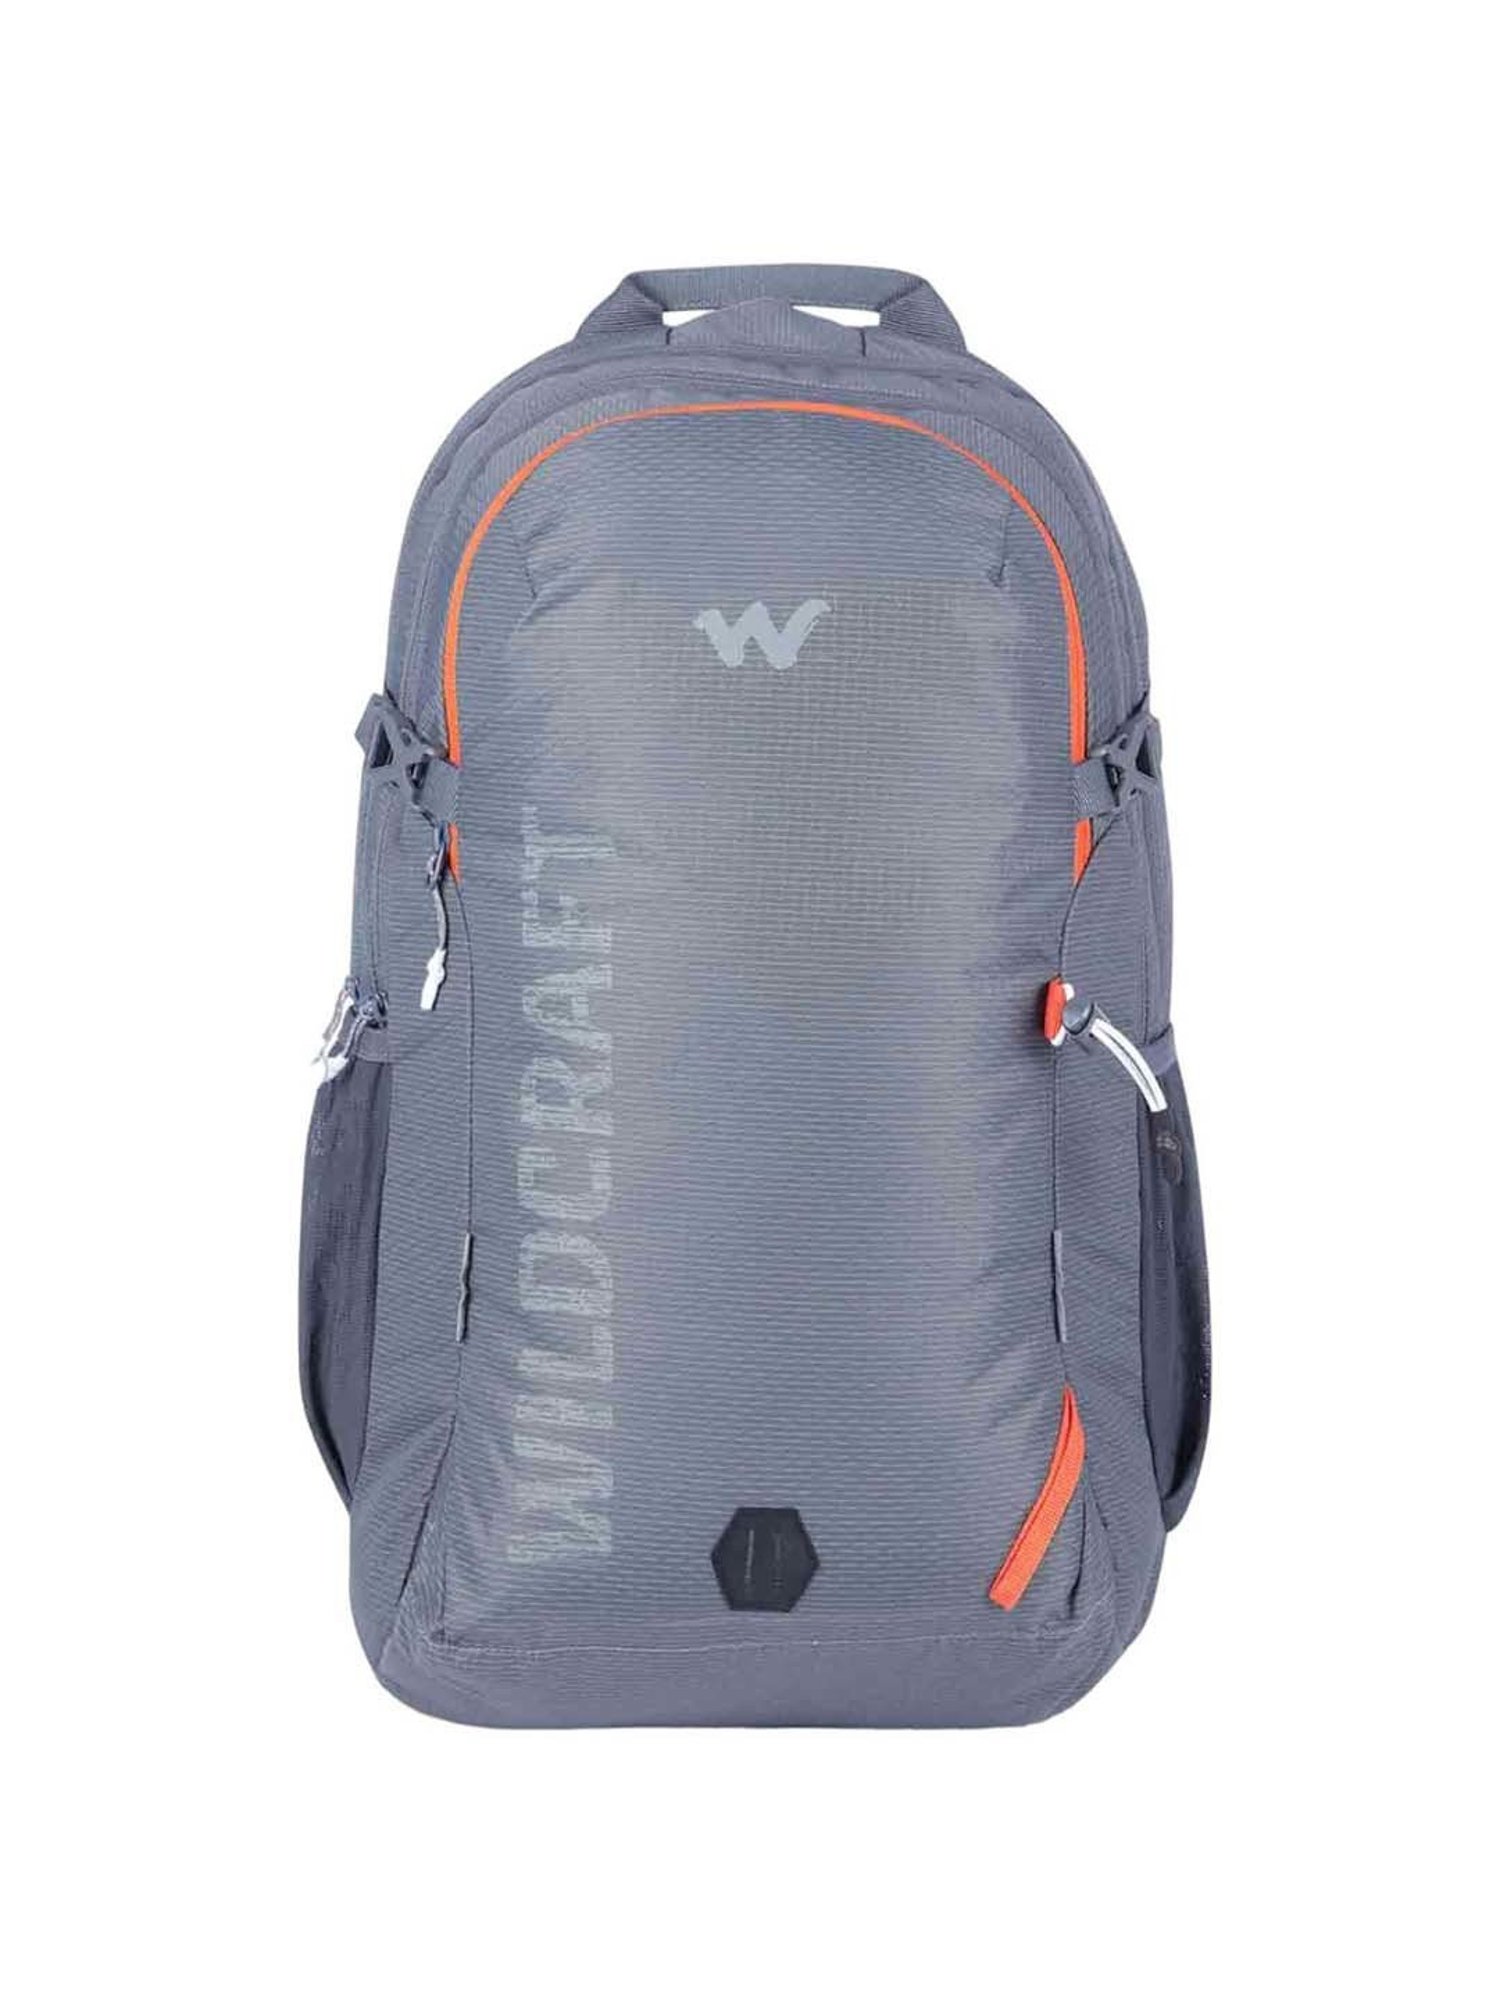 Buy Wildcraft Polyester Wc 1 Cracks Standard Backpack Blue (11910) (Medium  Size) at Amazon.in